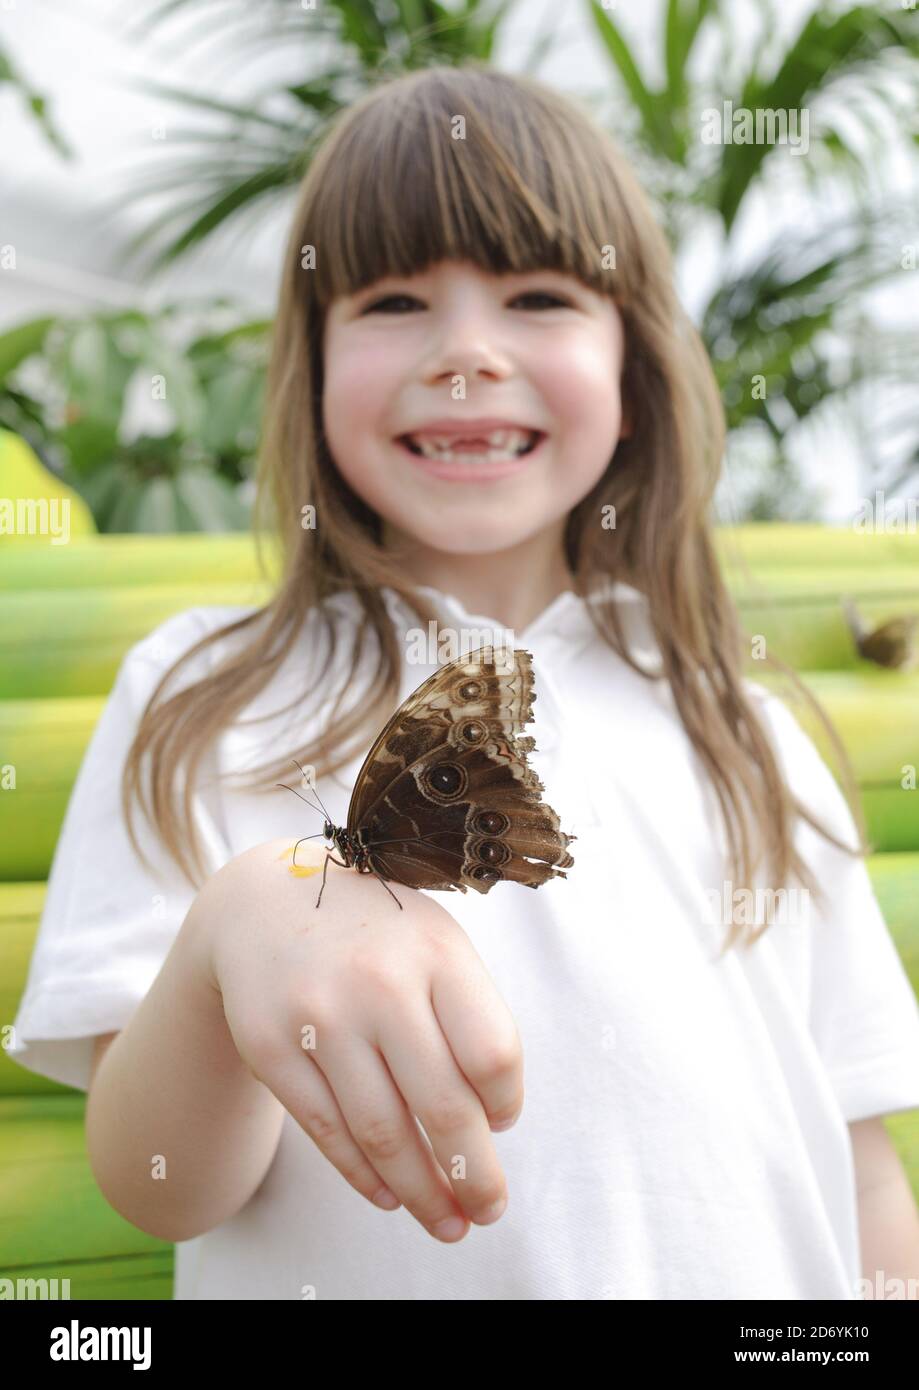 Year 1 pupil Sebina, from the Nightingale Primary school in Hackney, pictured at 'Sensational Butterflies', a new exhibition featuring hundreds of tropical butterflies at the National History Museum in south Kensington, London. Stock Photo